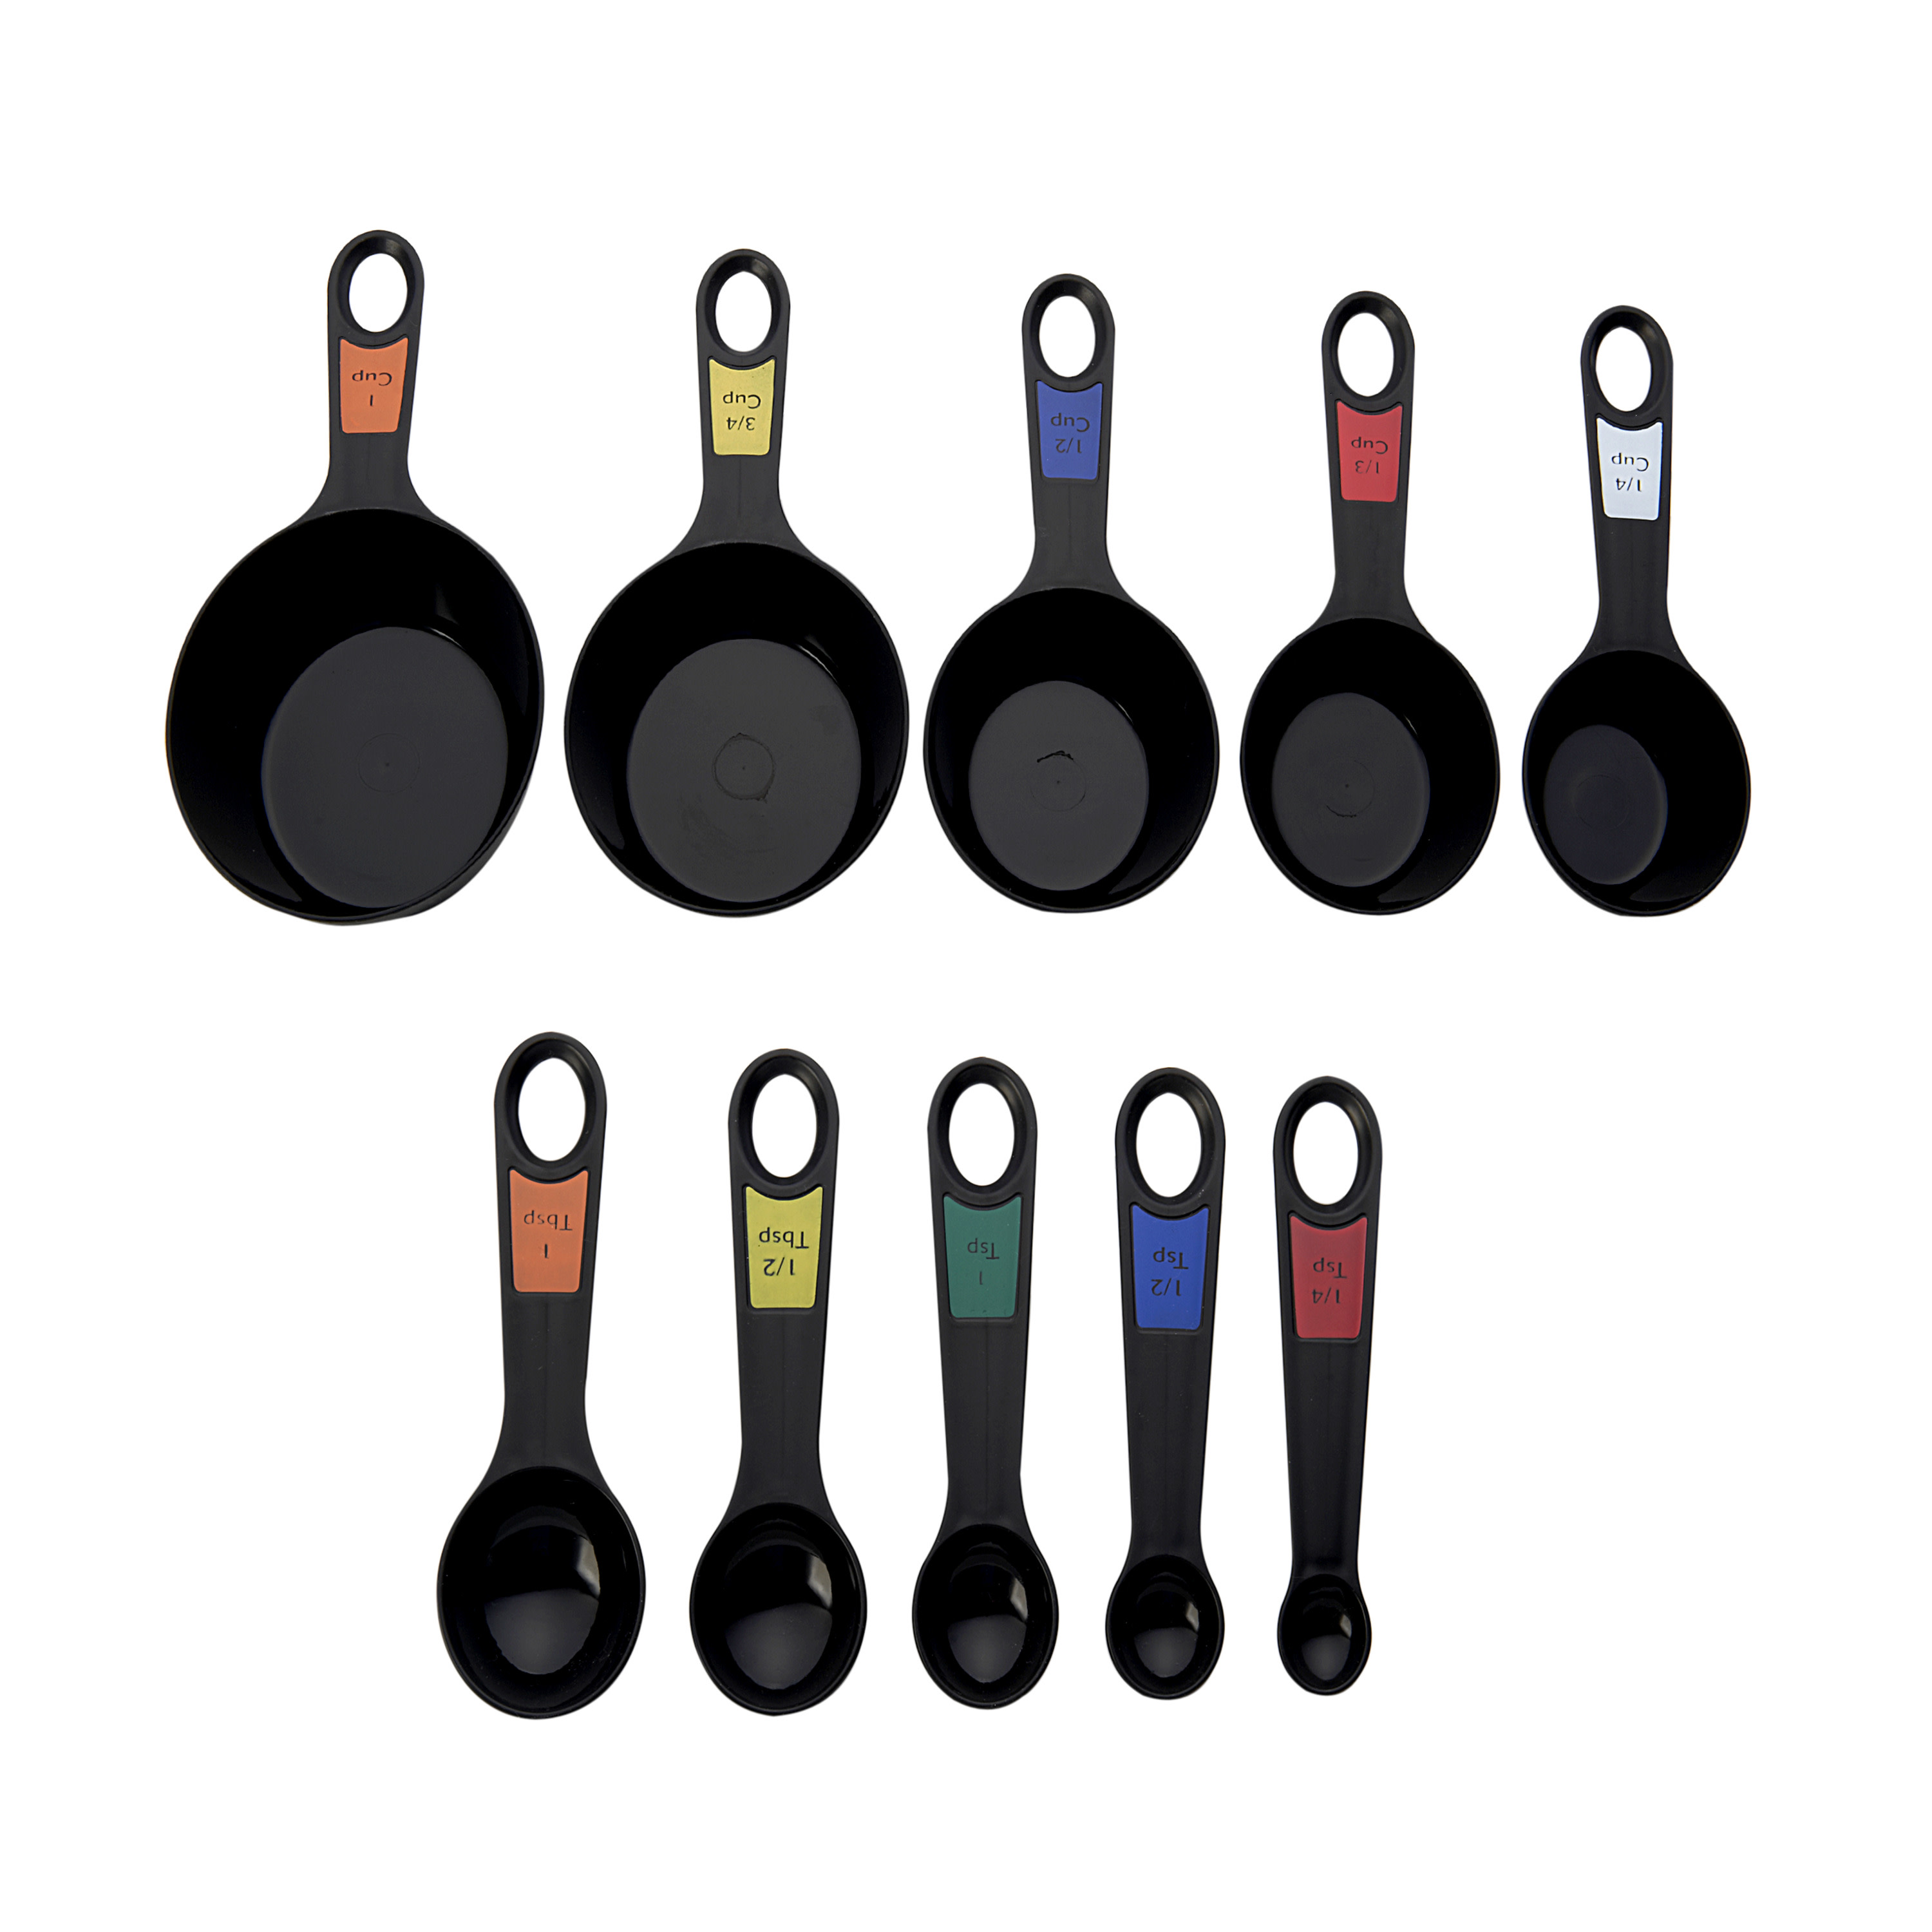 Farberware Professional 10 Piece Plastic Measuring Cup and Spoon Set Black - image 1 of 12